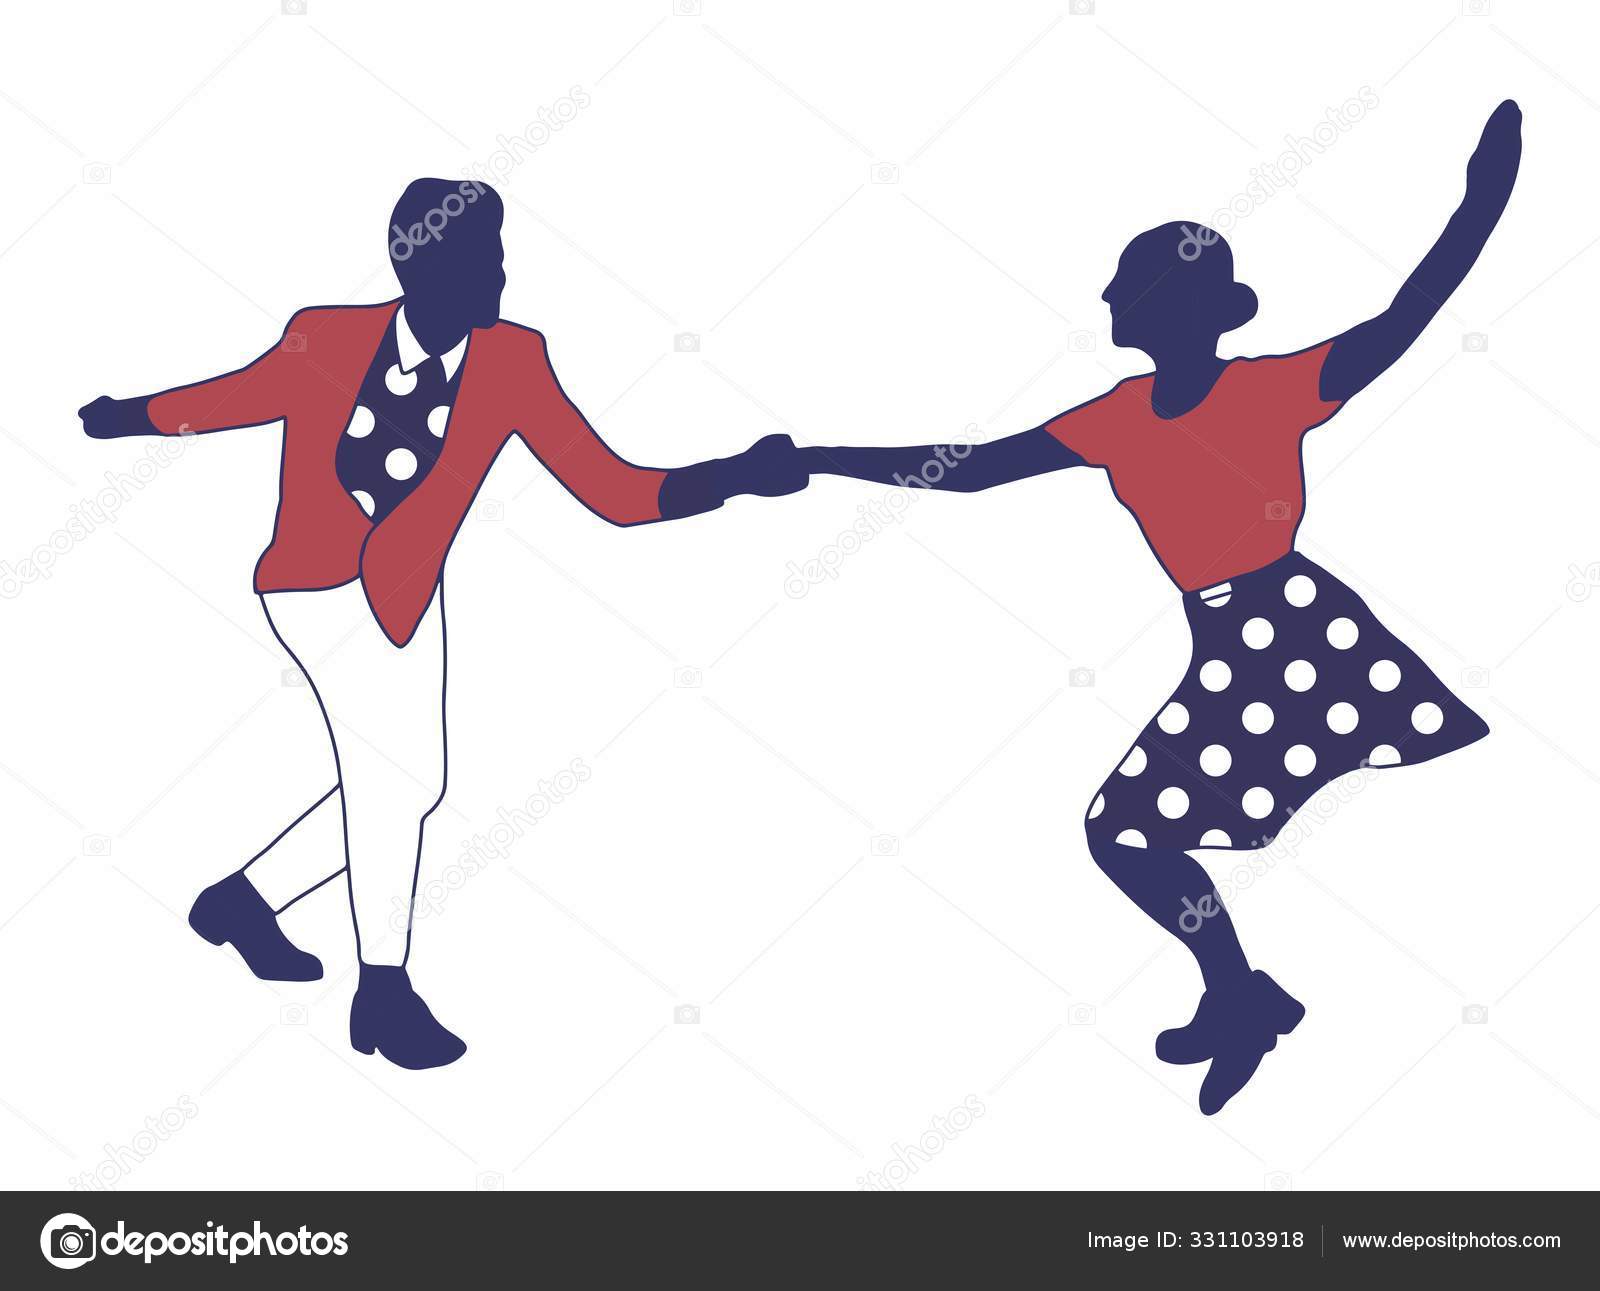 Couple dancing jazz swing isolated on white background. Clothes in pop art print polka dots. Vintage style 1950s. People in pop art clothes. Rockabilly, charleston, lindy hop or boogie woogie. Stock